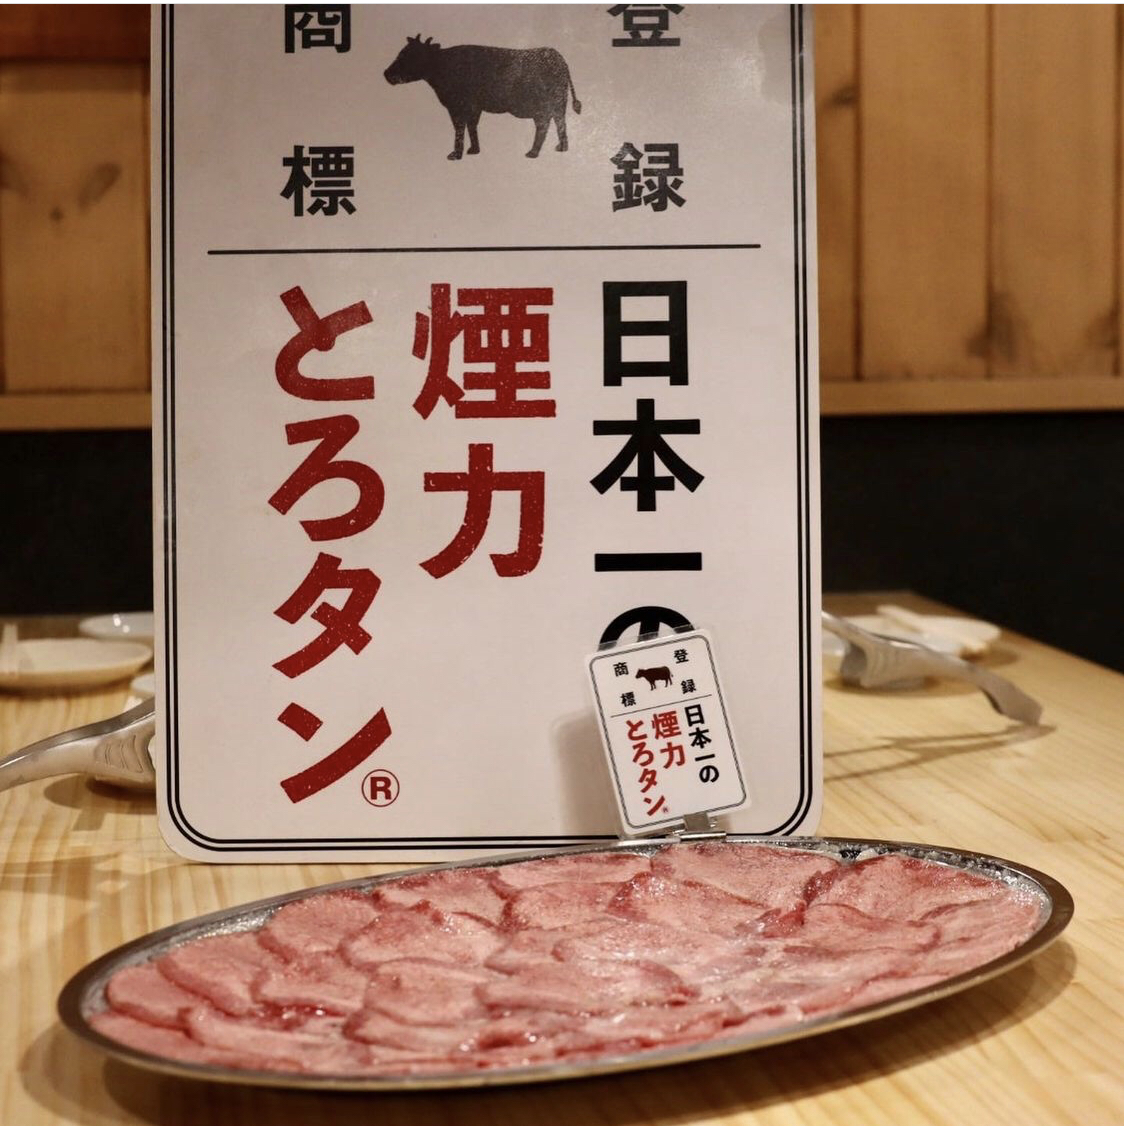 Enjoy a Yakiniku drinking party with high quality meat at a reasonable price!